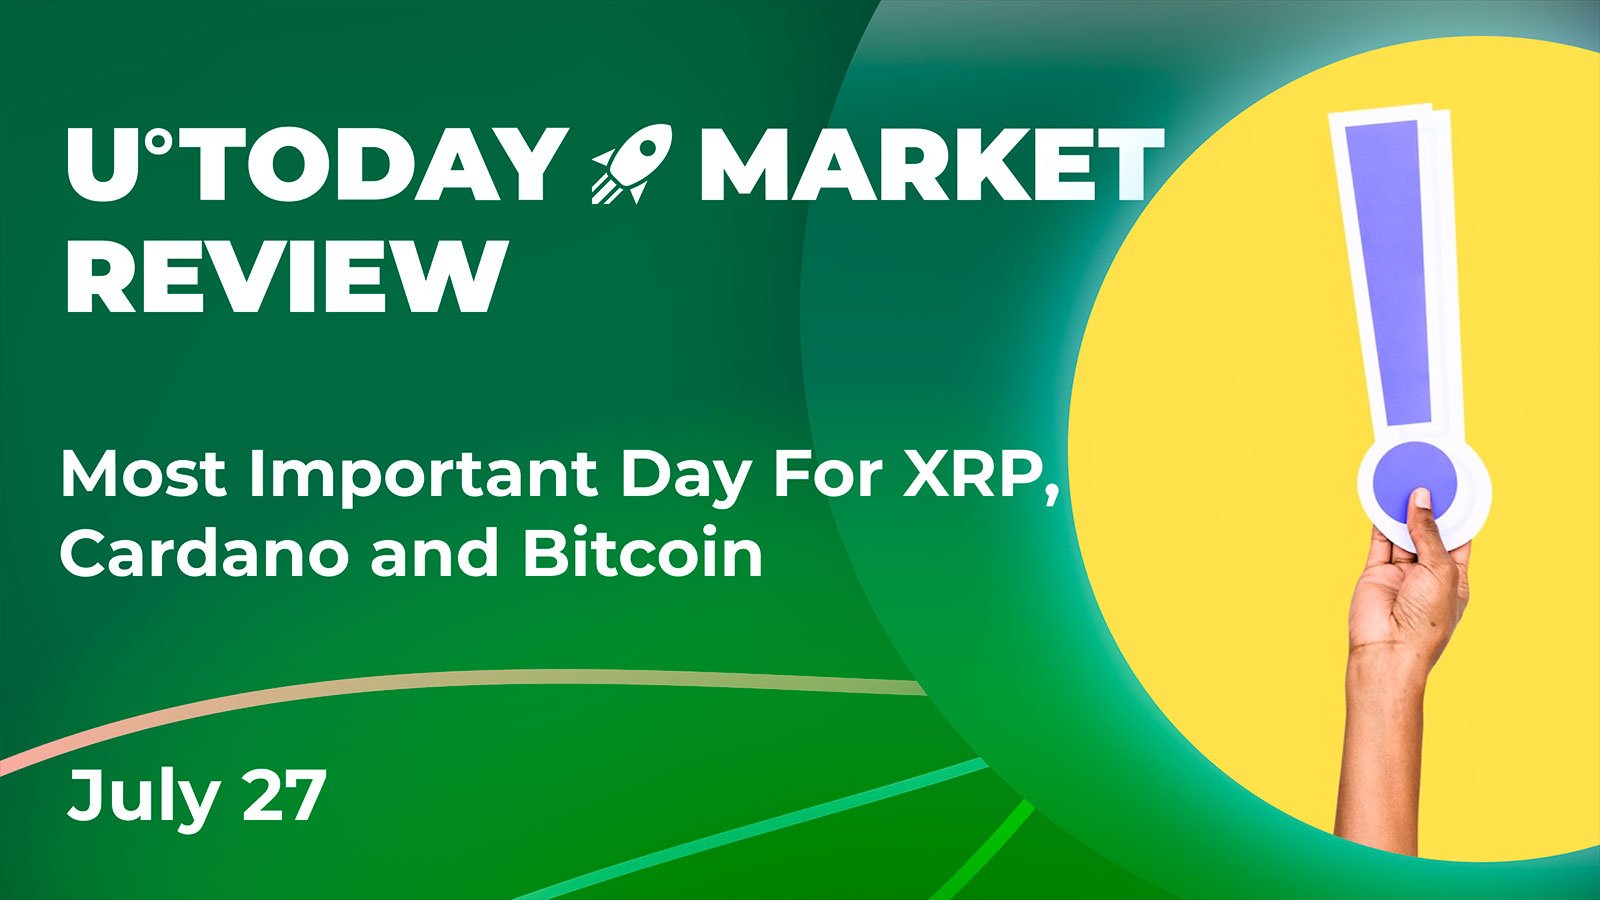 Most Important Day for XRP, Cardano and Bitcoin Could Be Today: Crypto Market Review, July 27